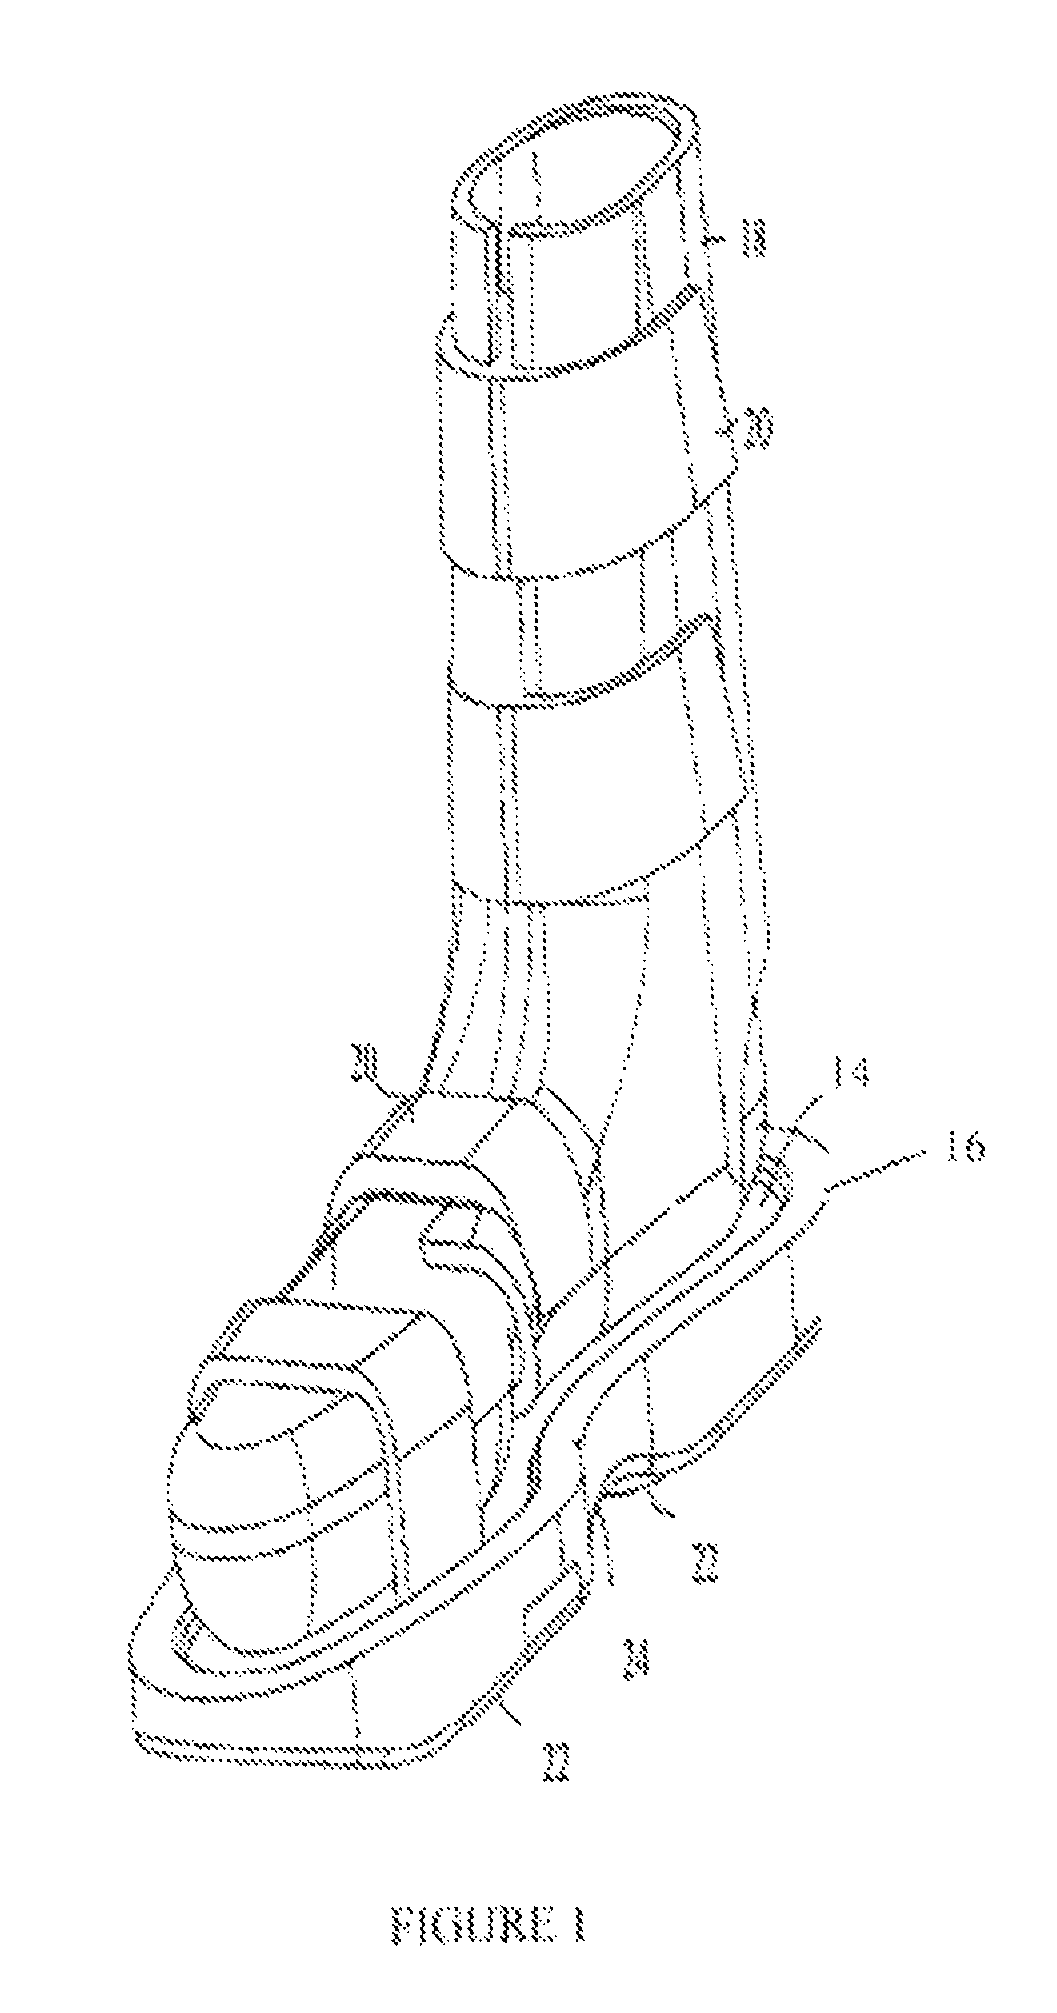 Device and methods for treating a lower limb joint pathology and lower limb pain